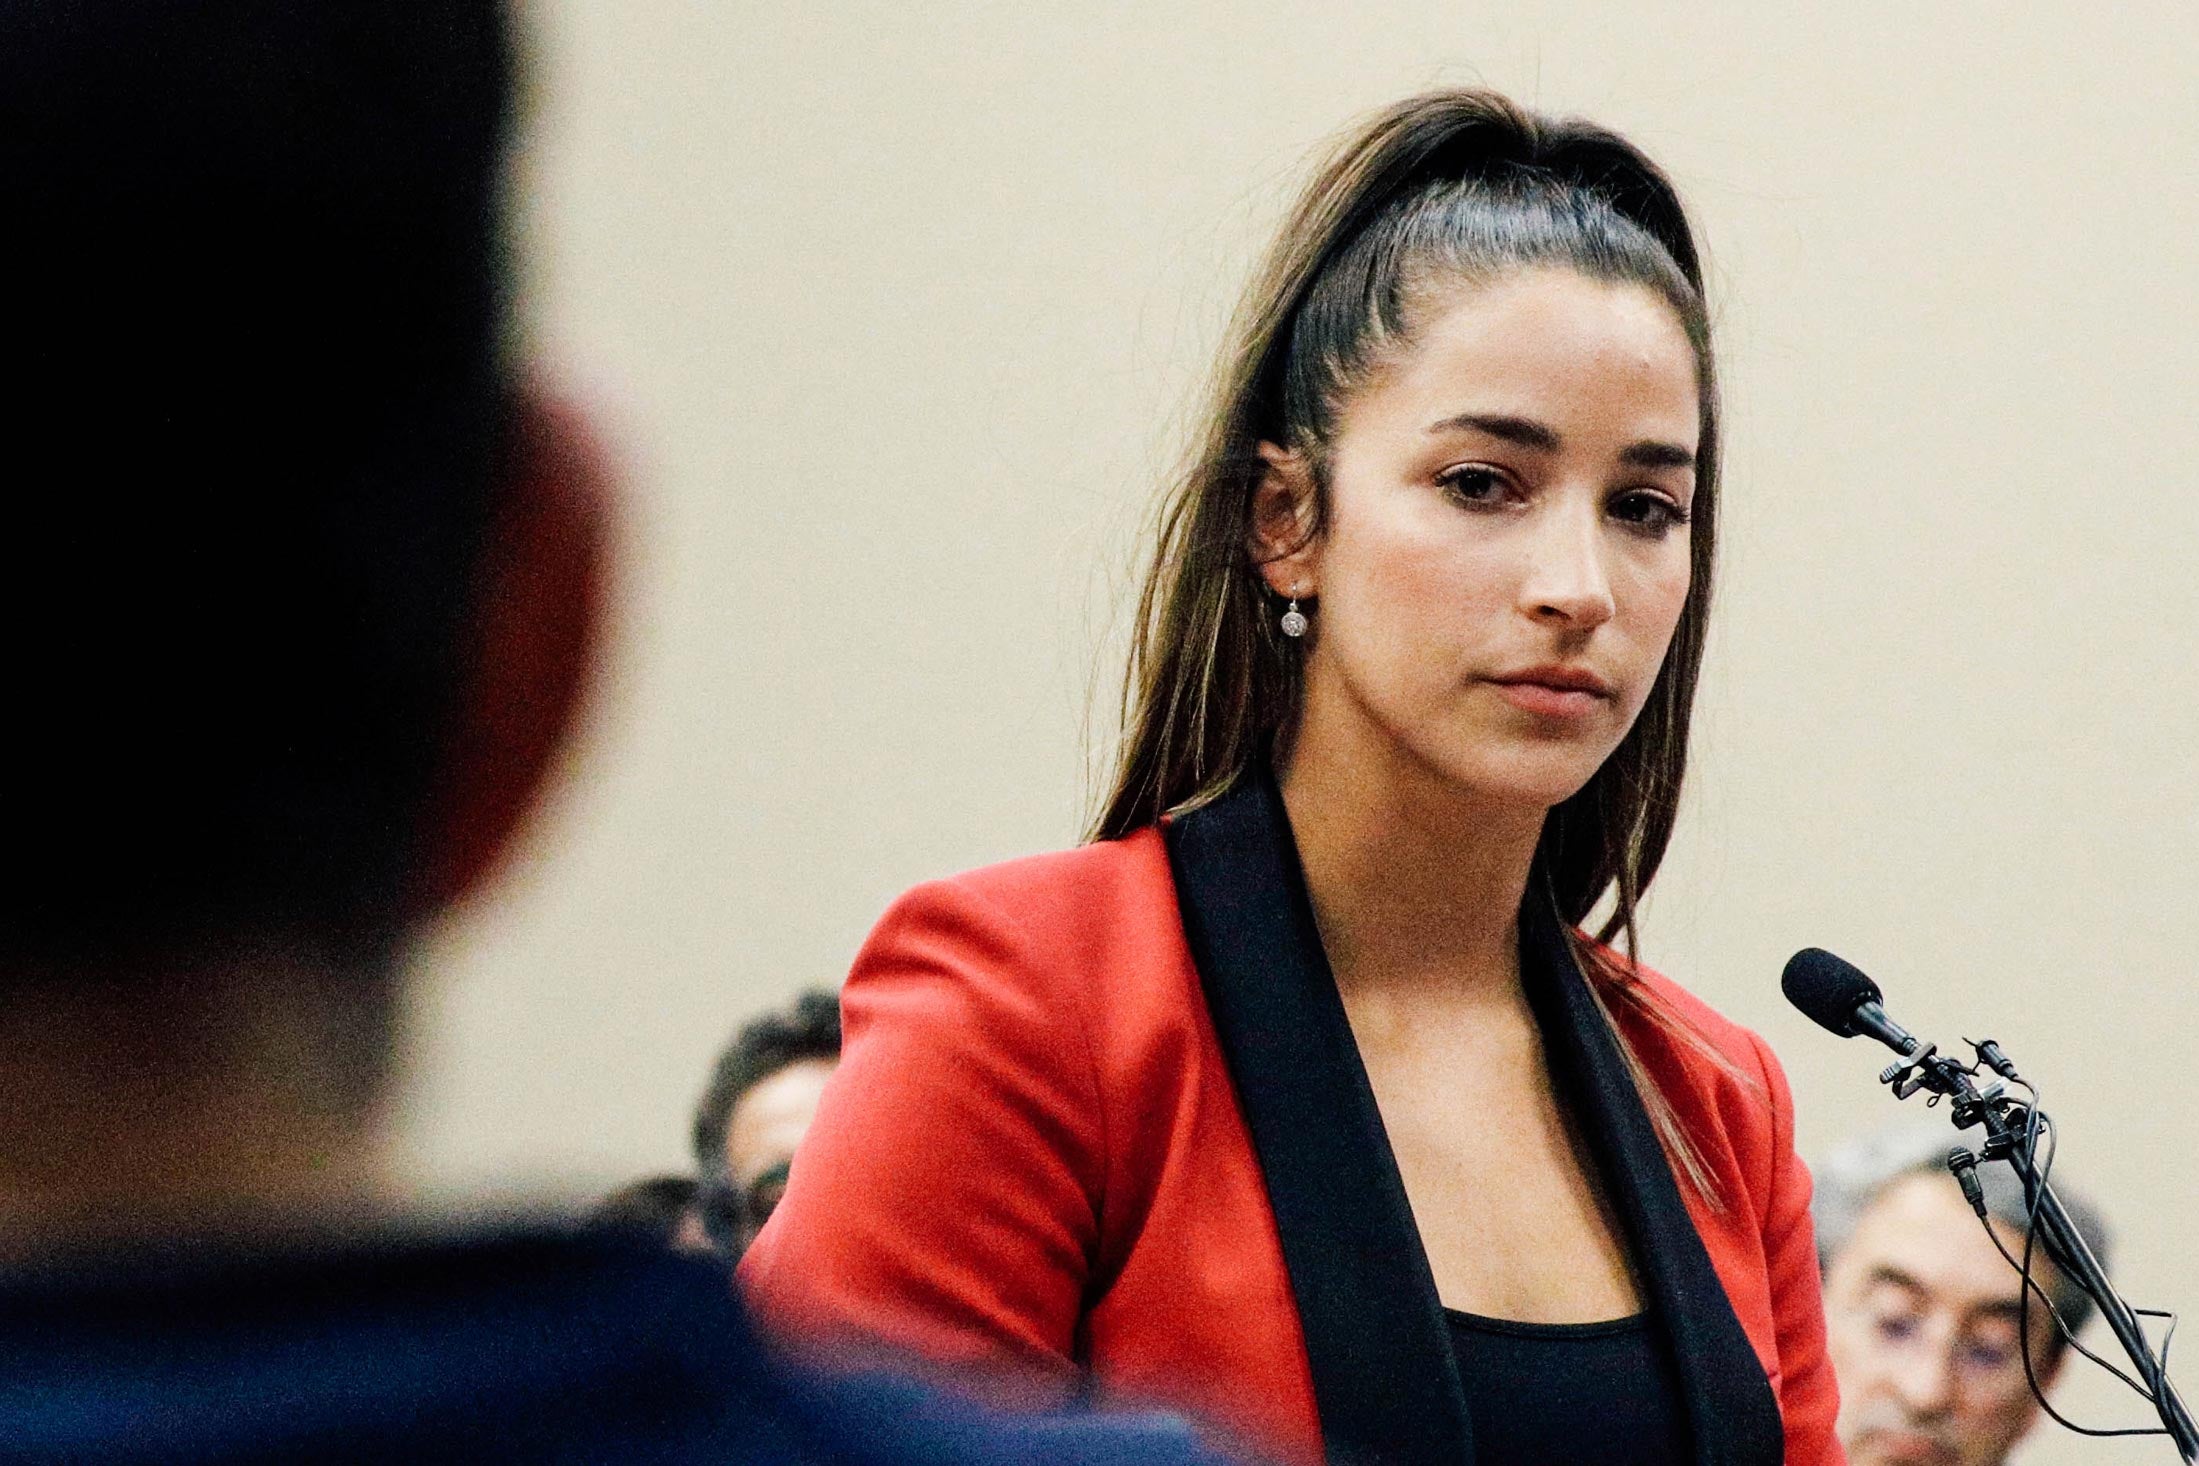 Aly Raisman speaks at the sentencing hearing for Larry Nassar.